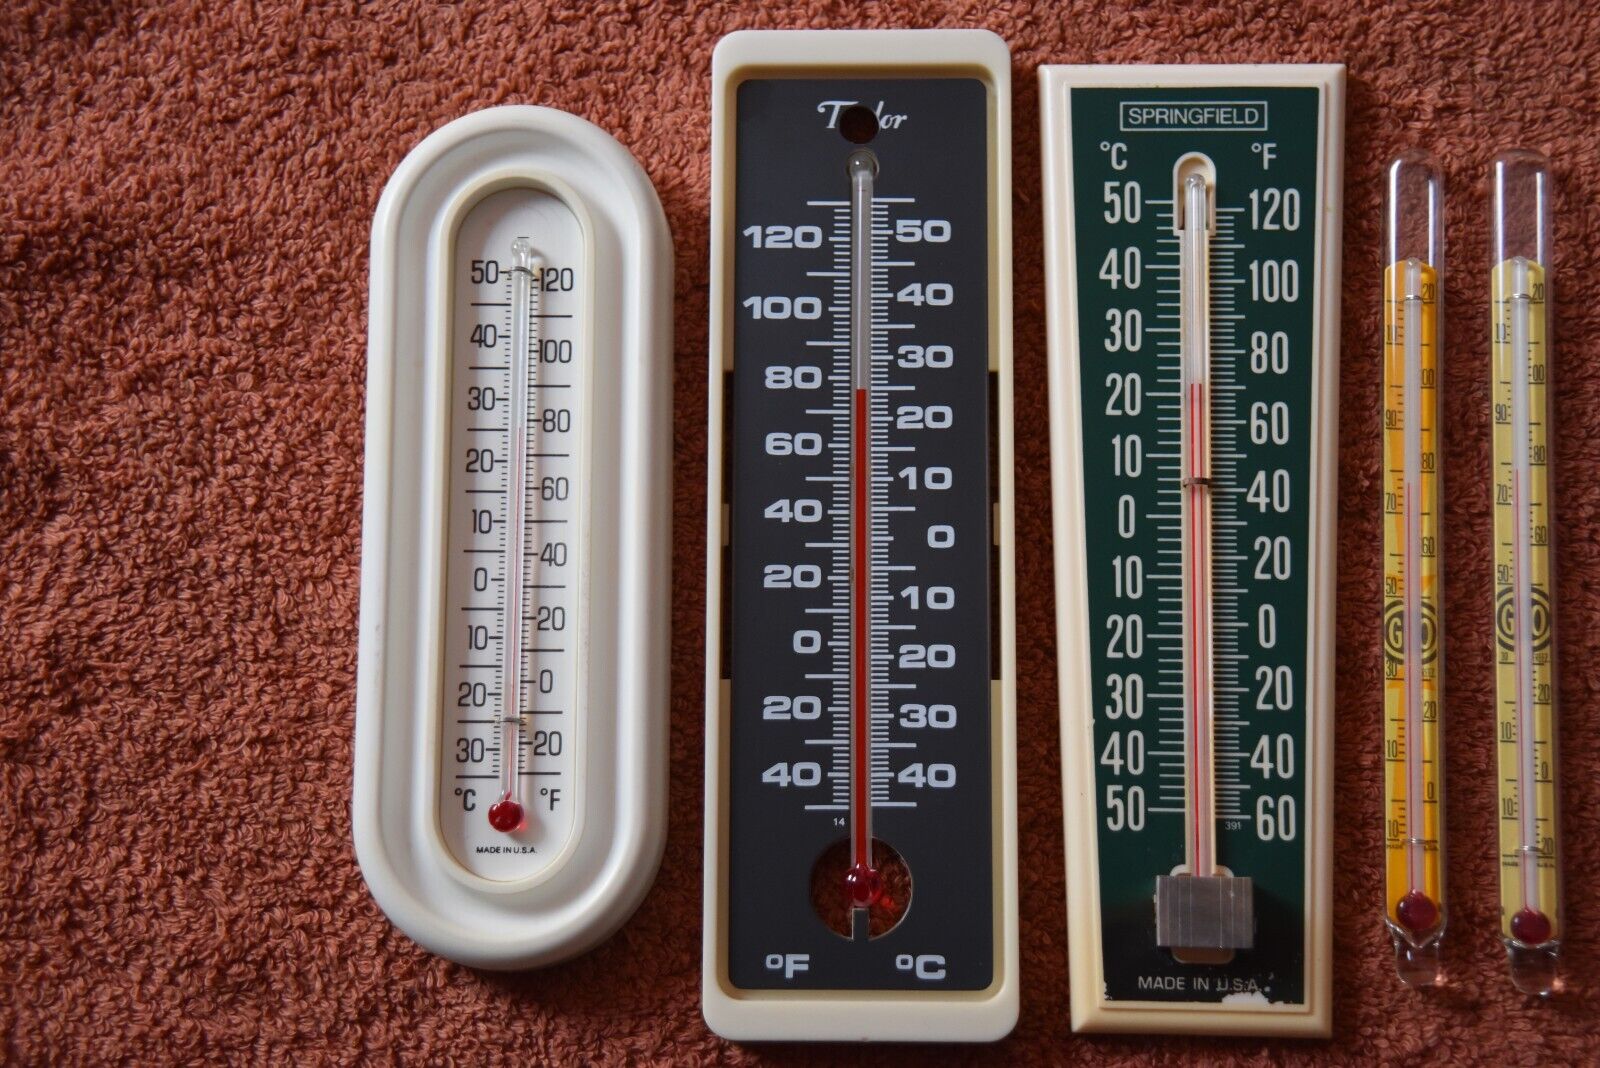 5 VNTG VARIED STYLES THERMOMETERS: TAYLOR SPRINGFIELD GLASS CHANEY SALE/SHIPPED